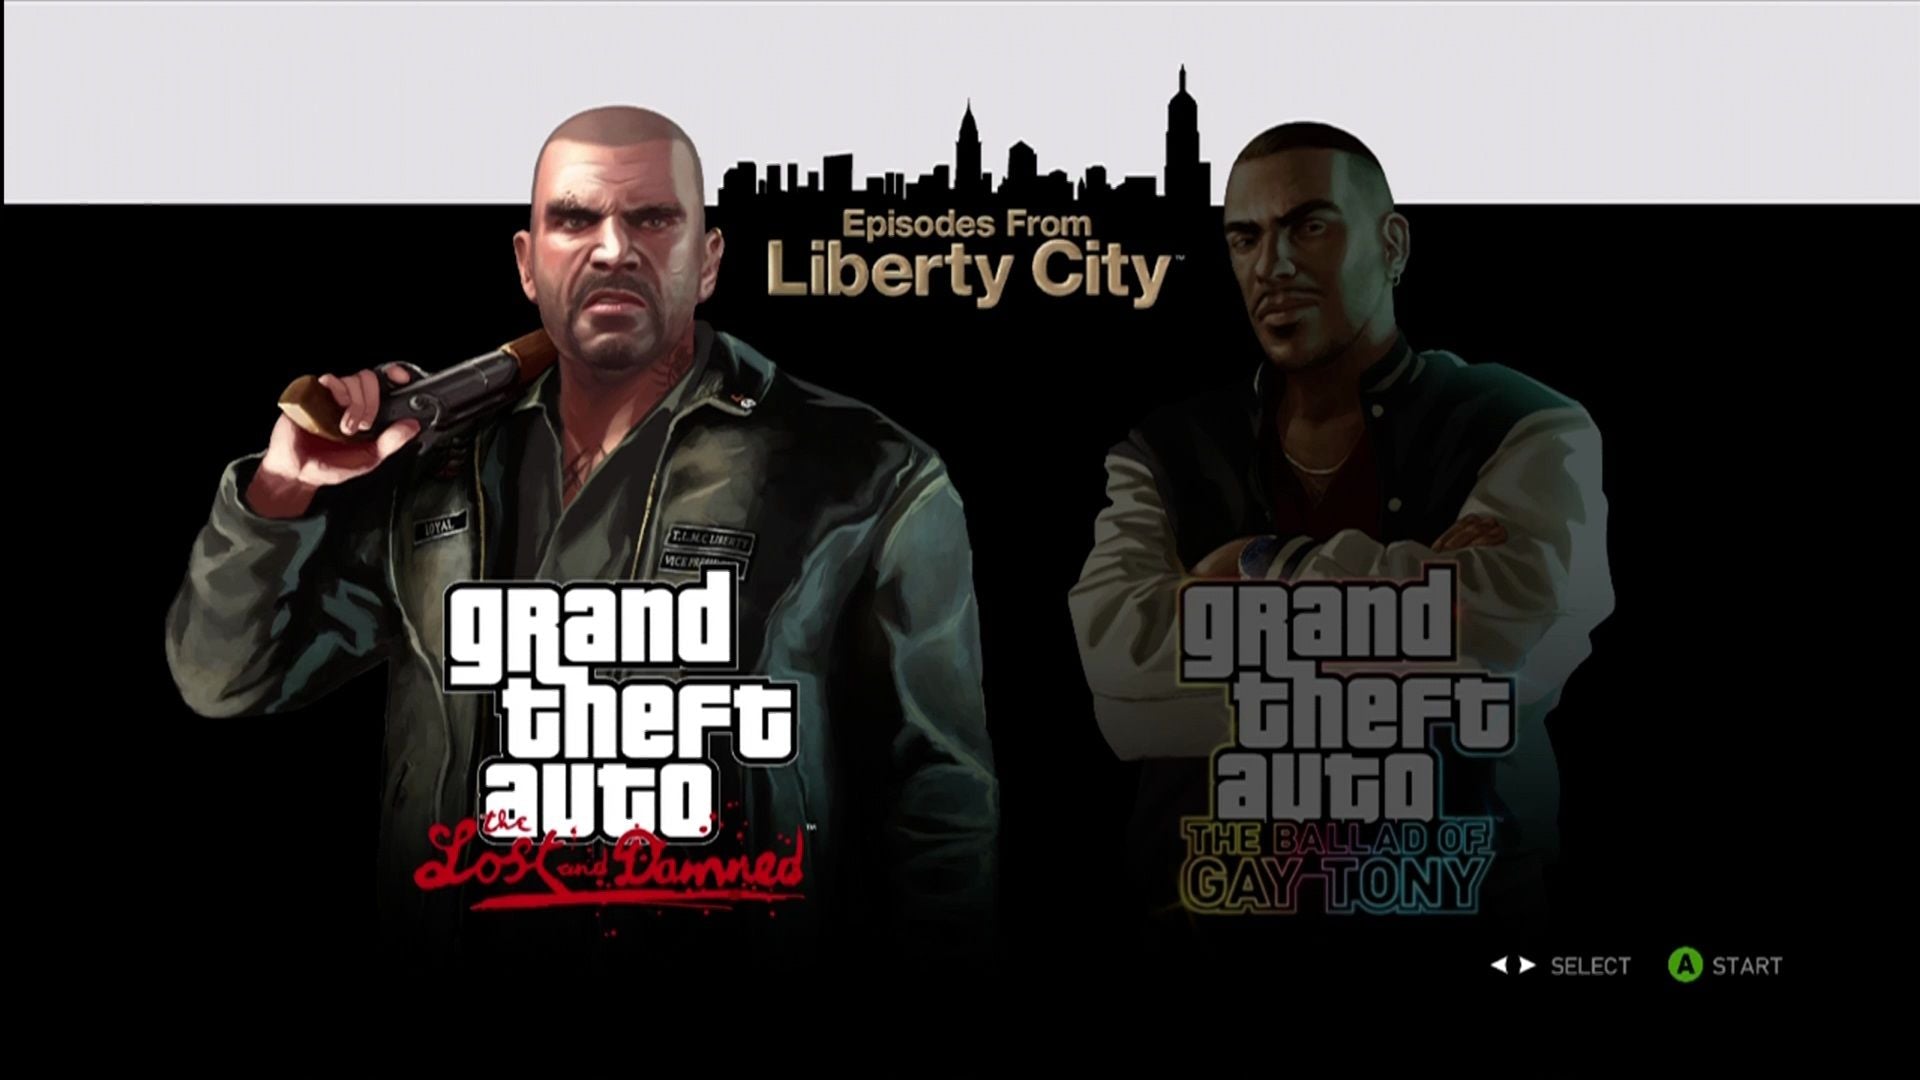 Grand Theft Auto: Episodes from Liberty City - Xbox 360 Game